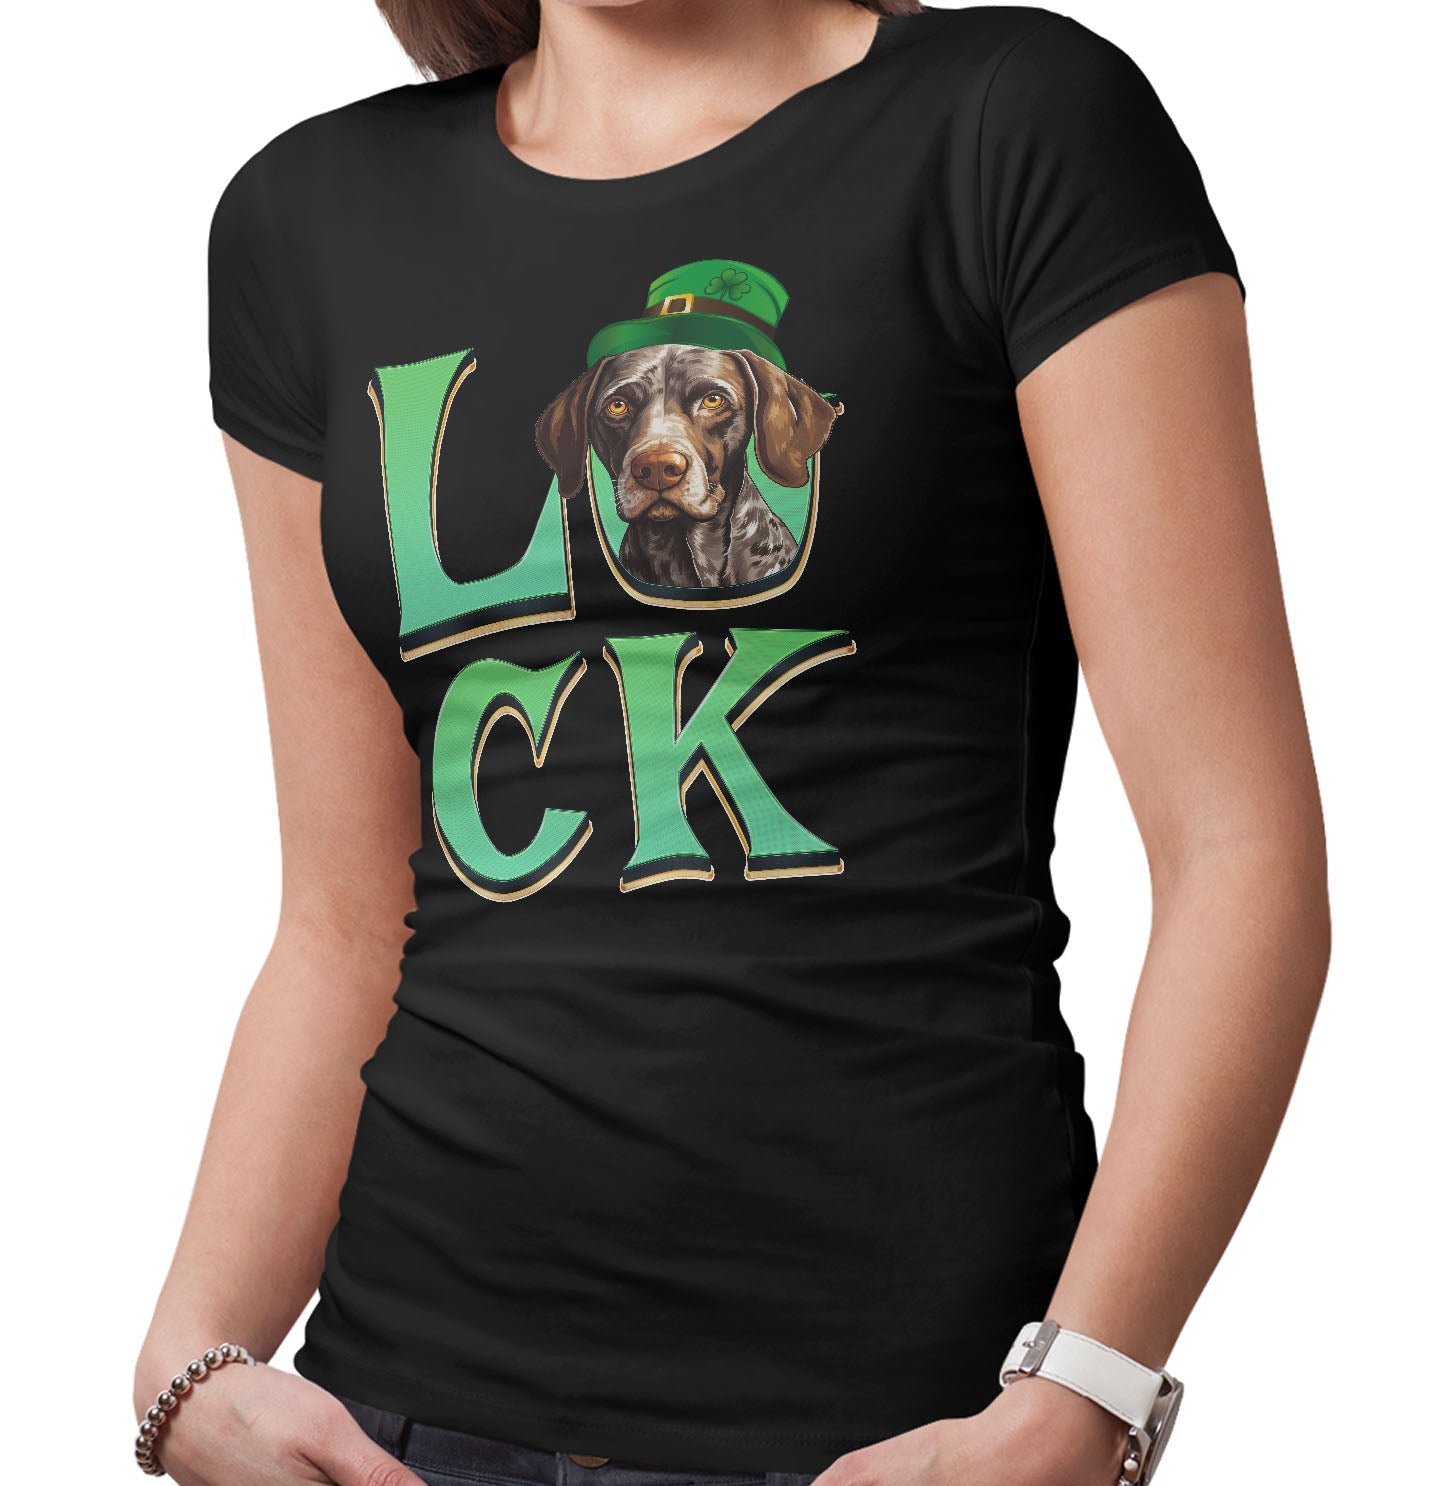 Big LUCK St. Patrick's Day German Shorthaired Pointer - Women's Fitted T-Shirt